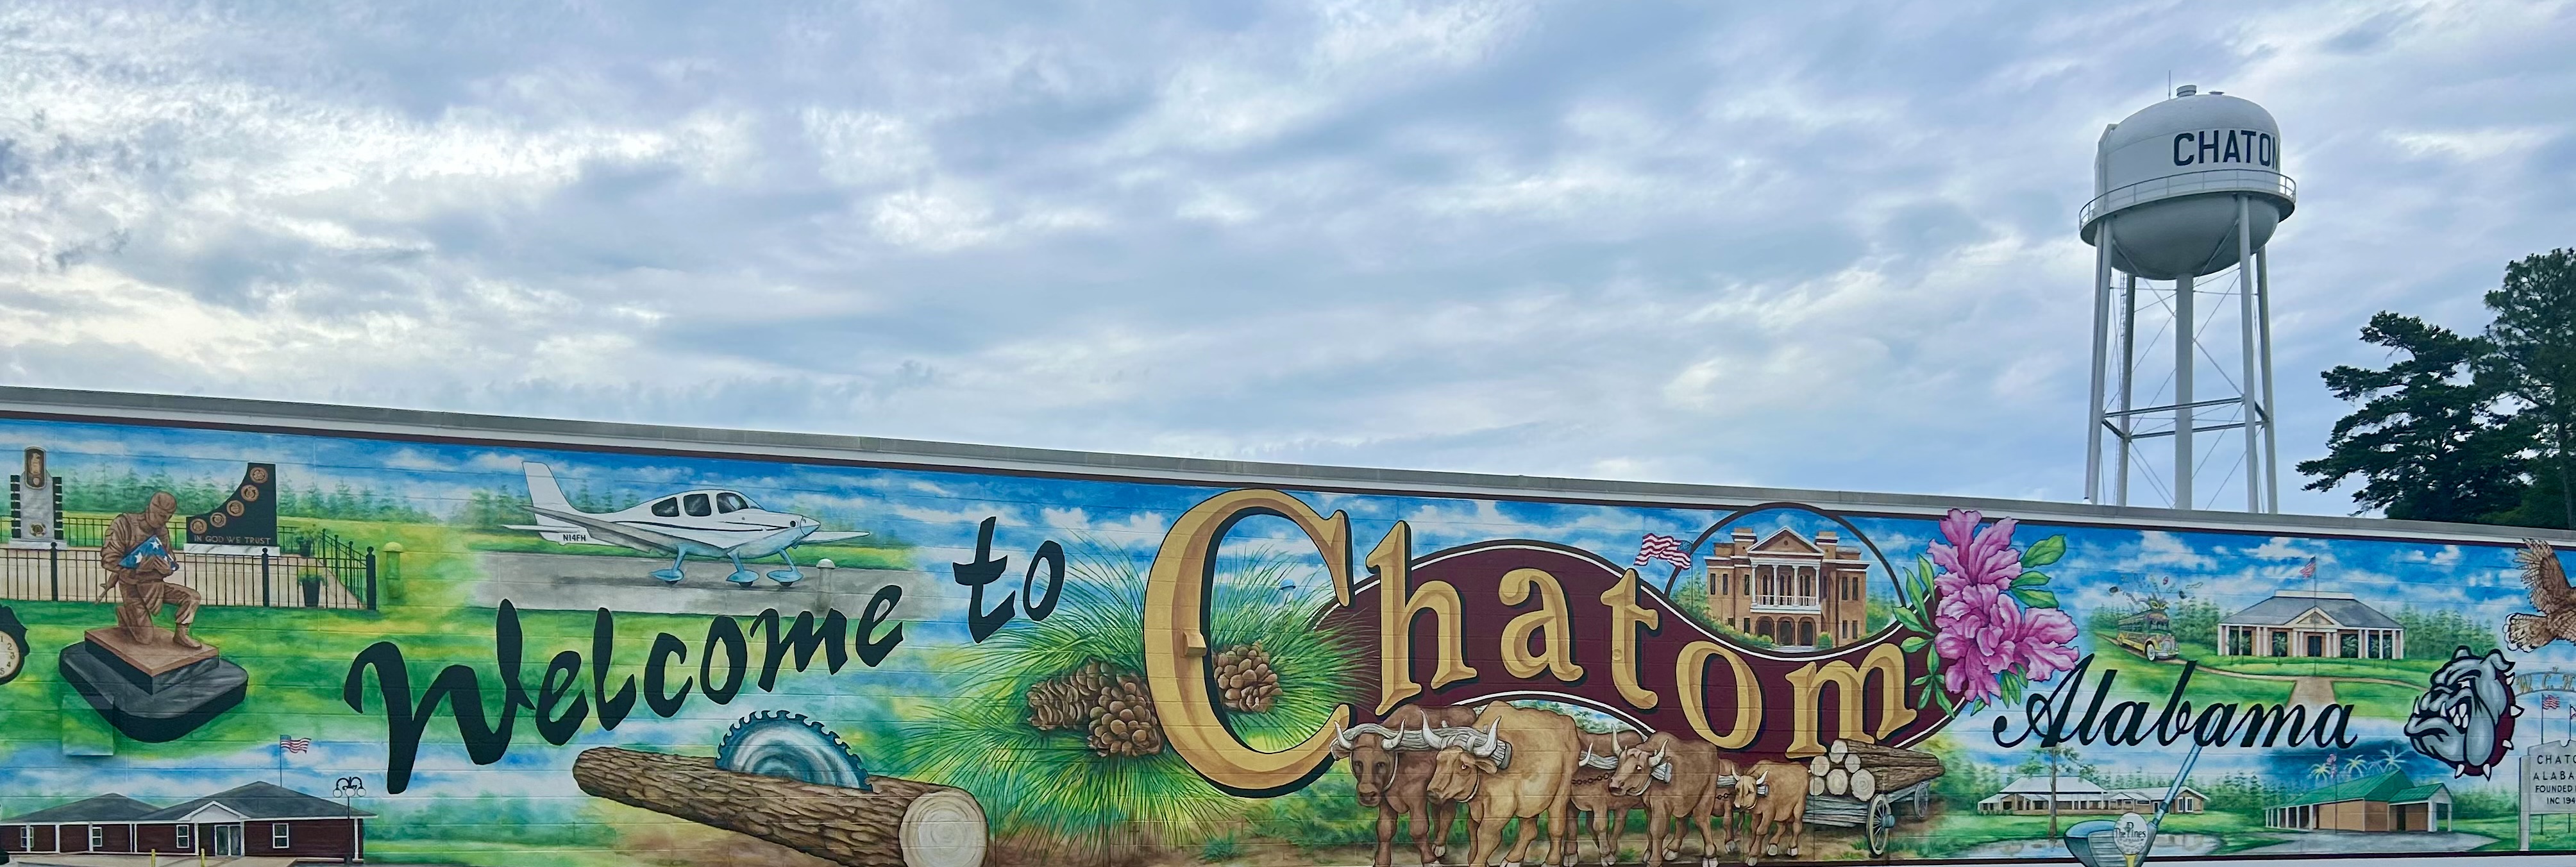 The 2024 Chatom mural is located on the site of the old Cam Manufacturing company on Highway 56.